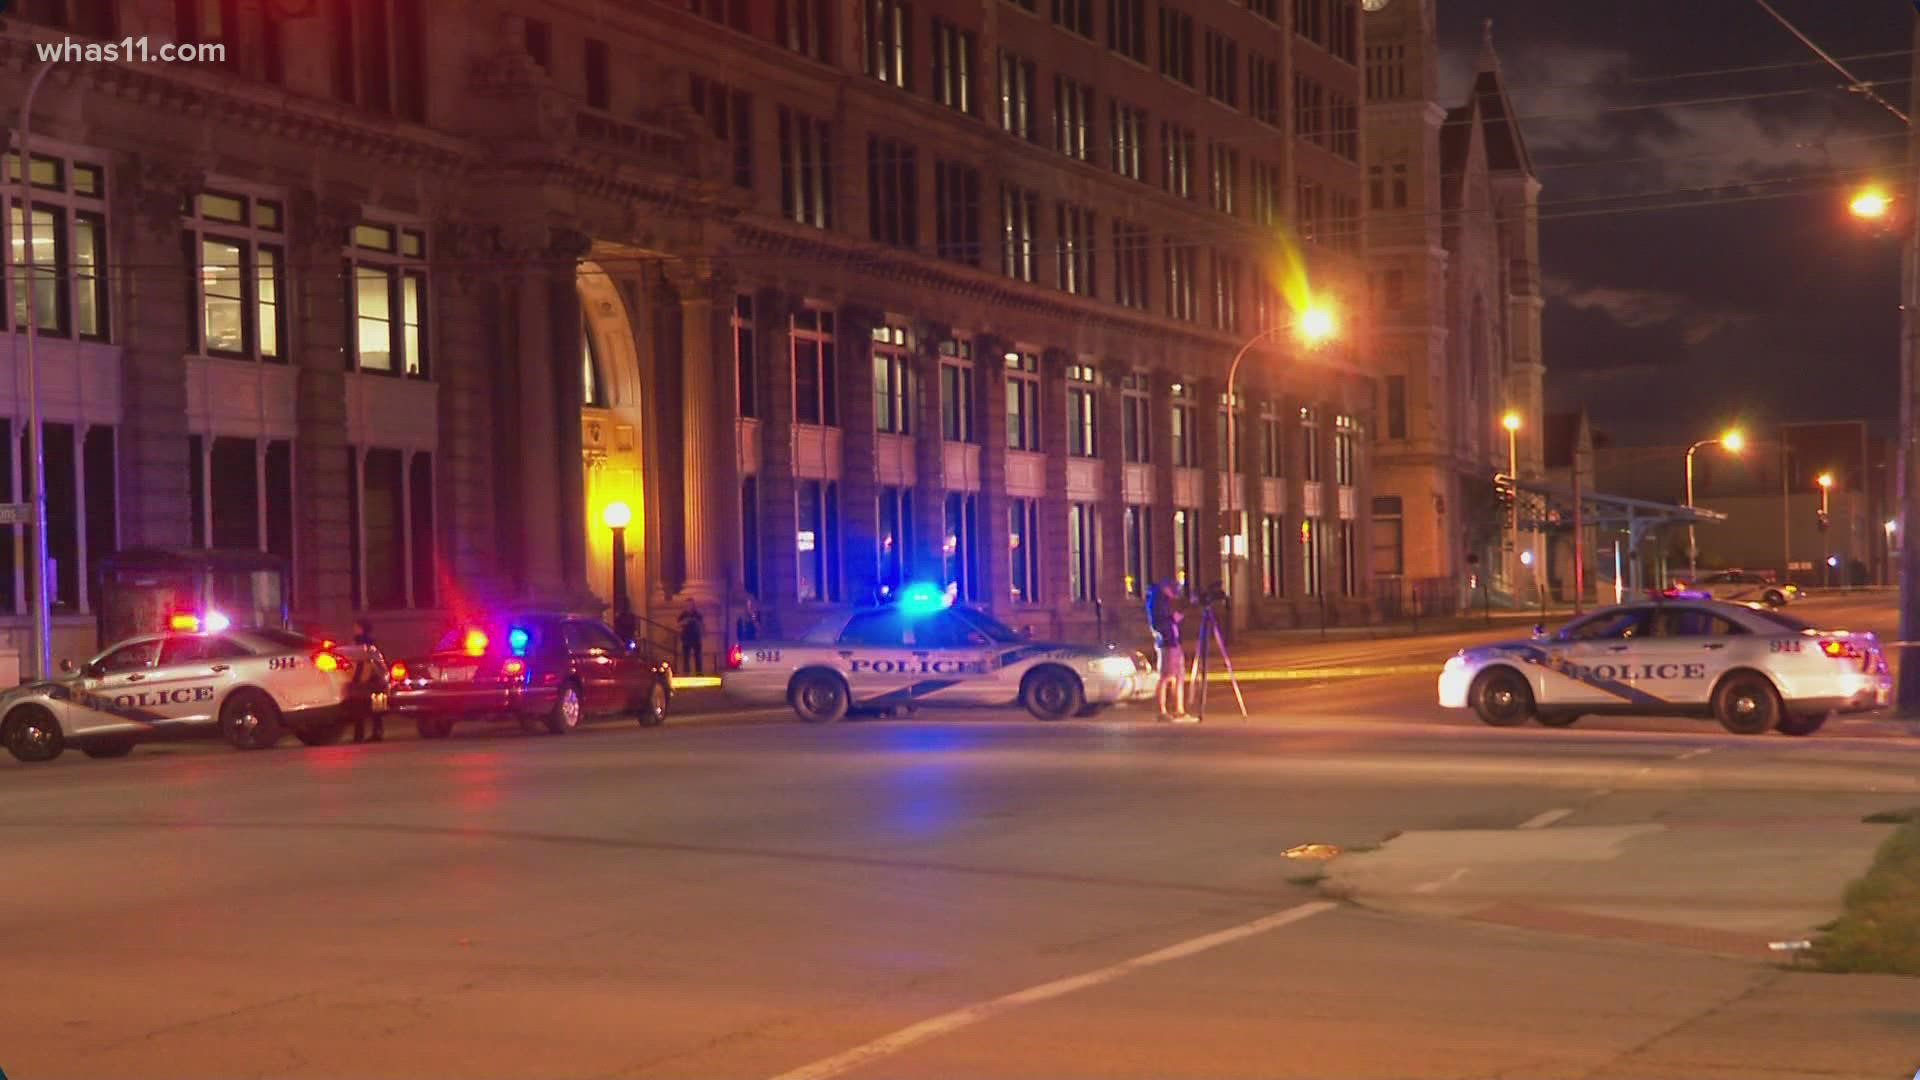 Police are looking for suspects after two men were shot at 9th and Broadway in Louisville.